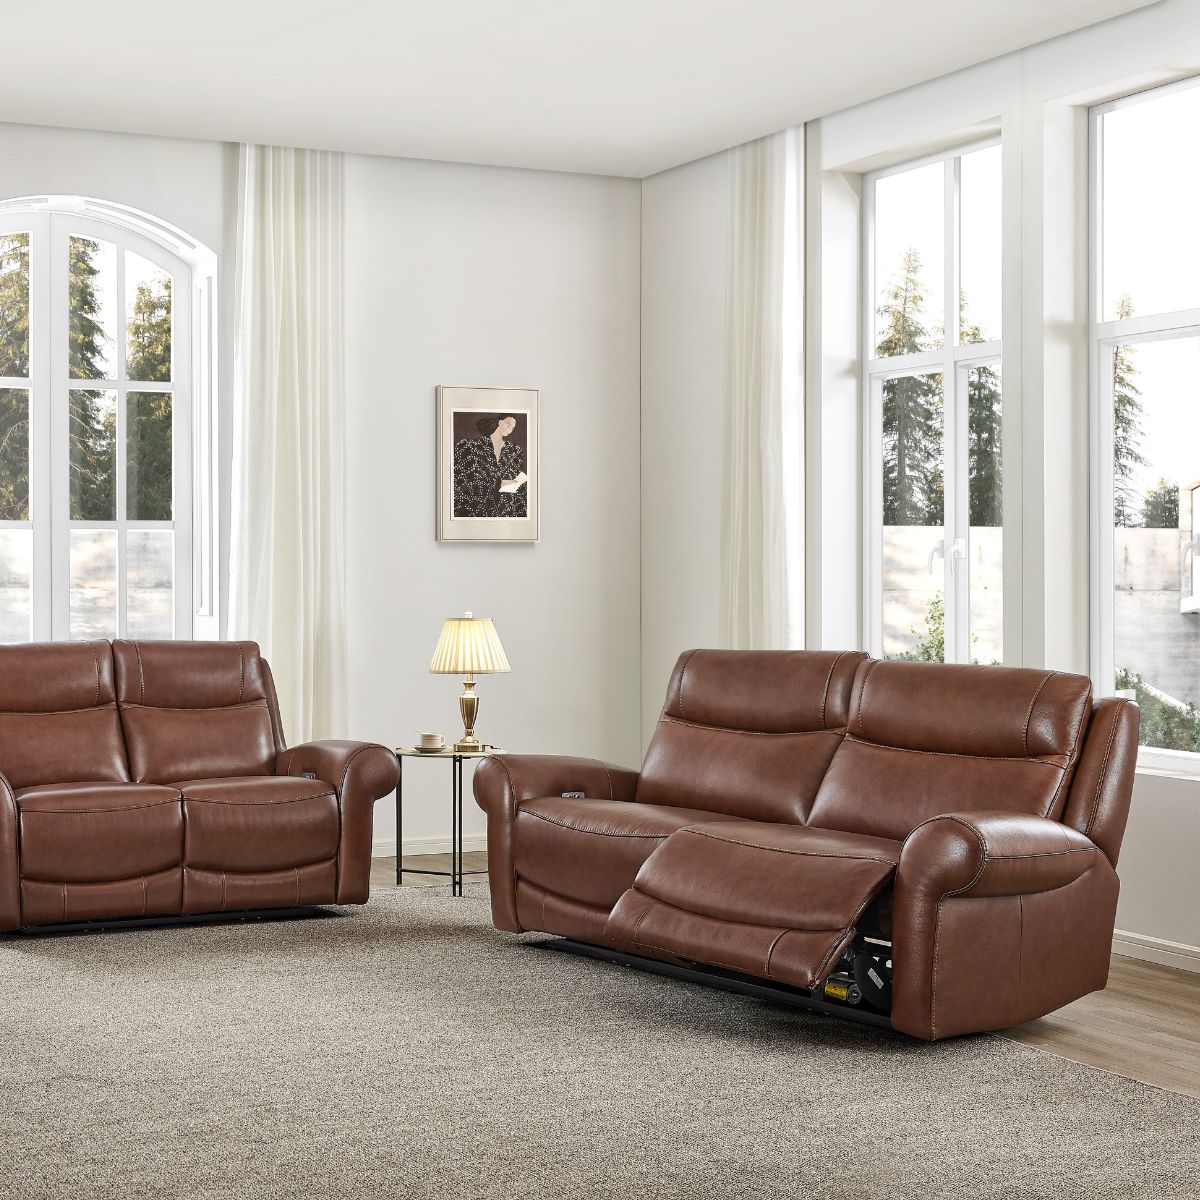 Lindfield Tan Leather 3 Seater Powered Recliner - 6